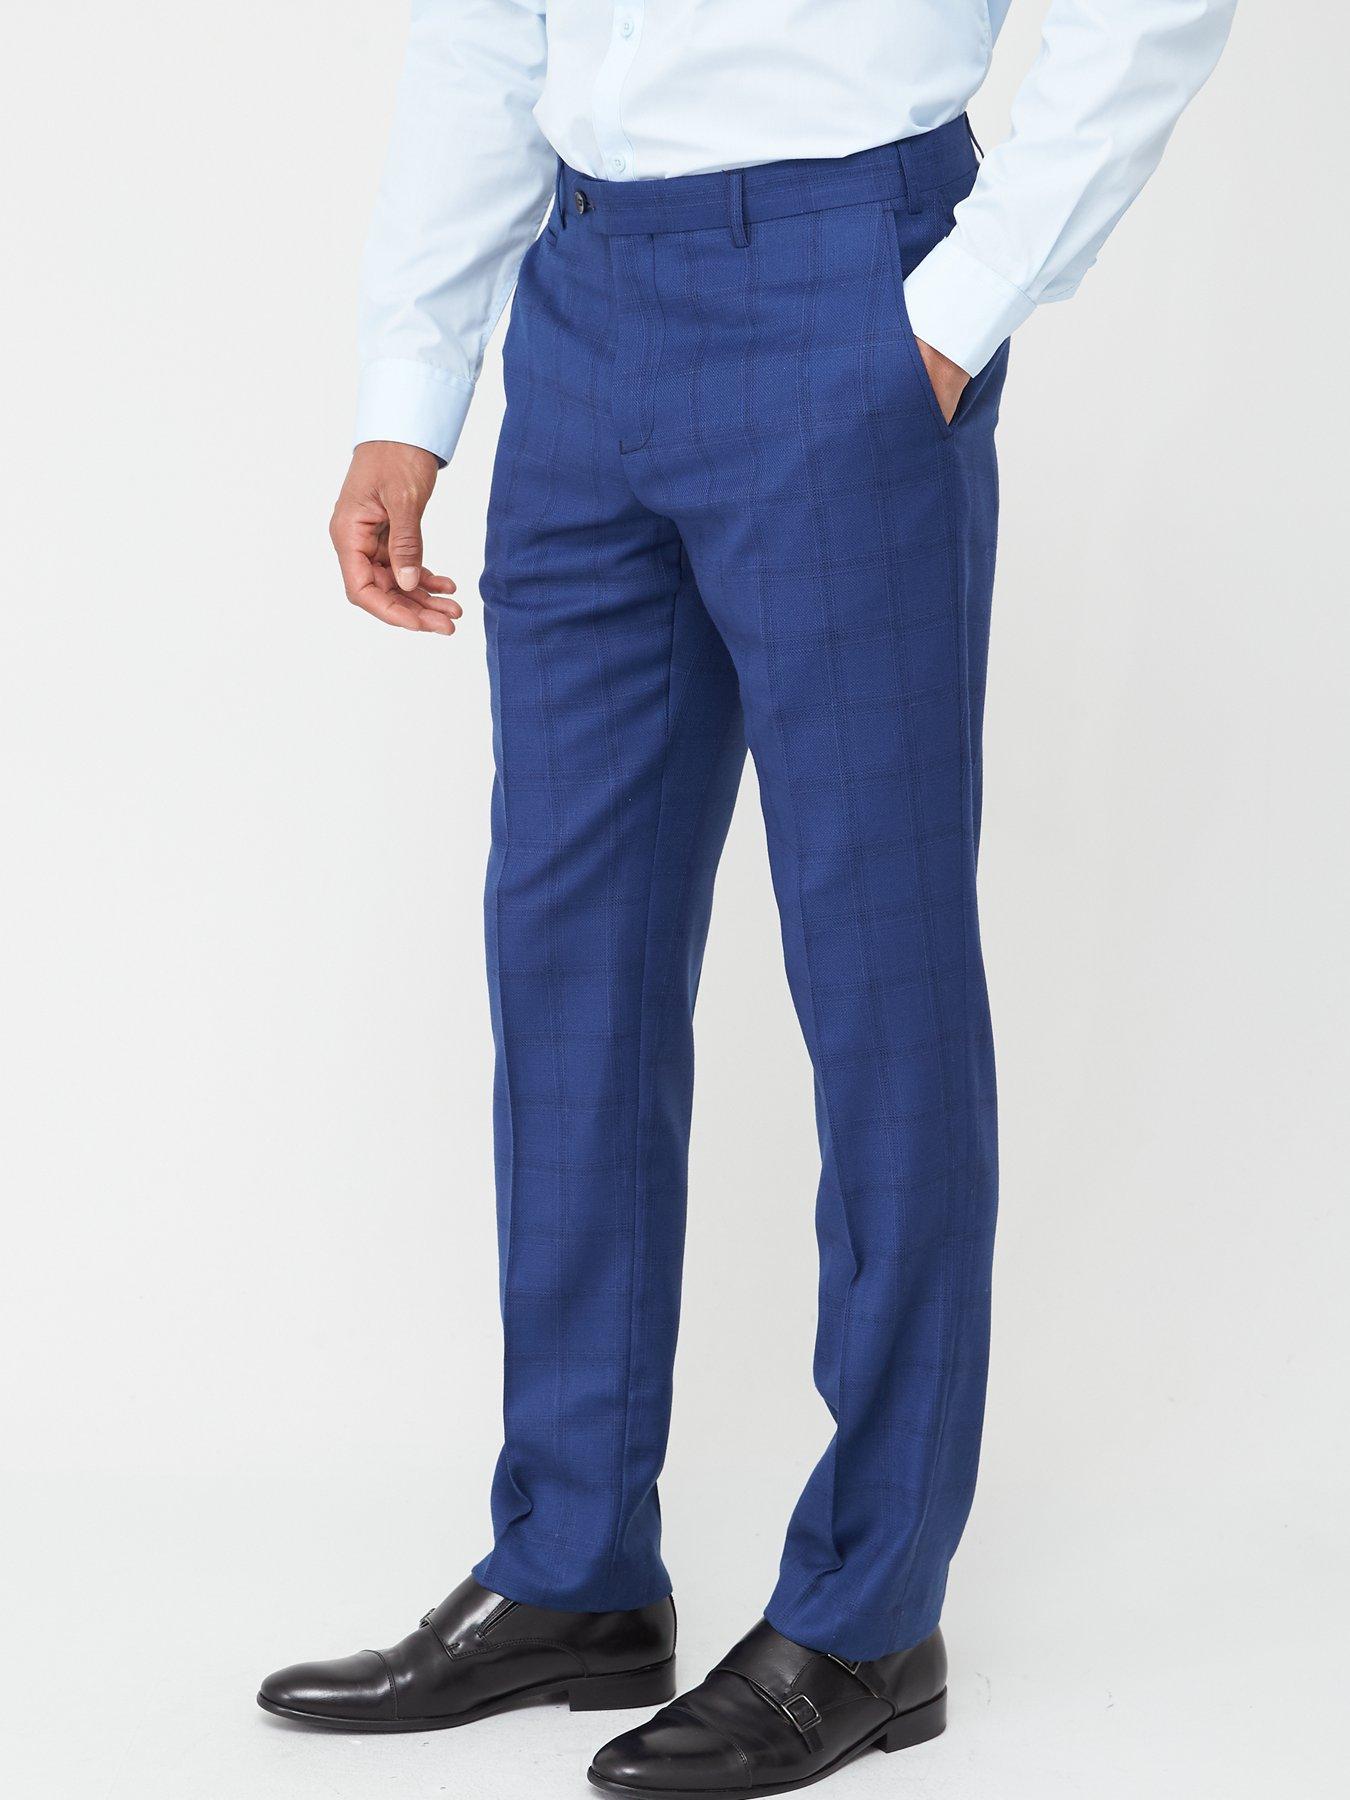 Trousers & Chinos Tailored Aquino Trousers - Blue Check